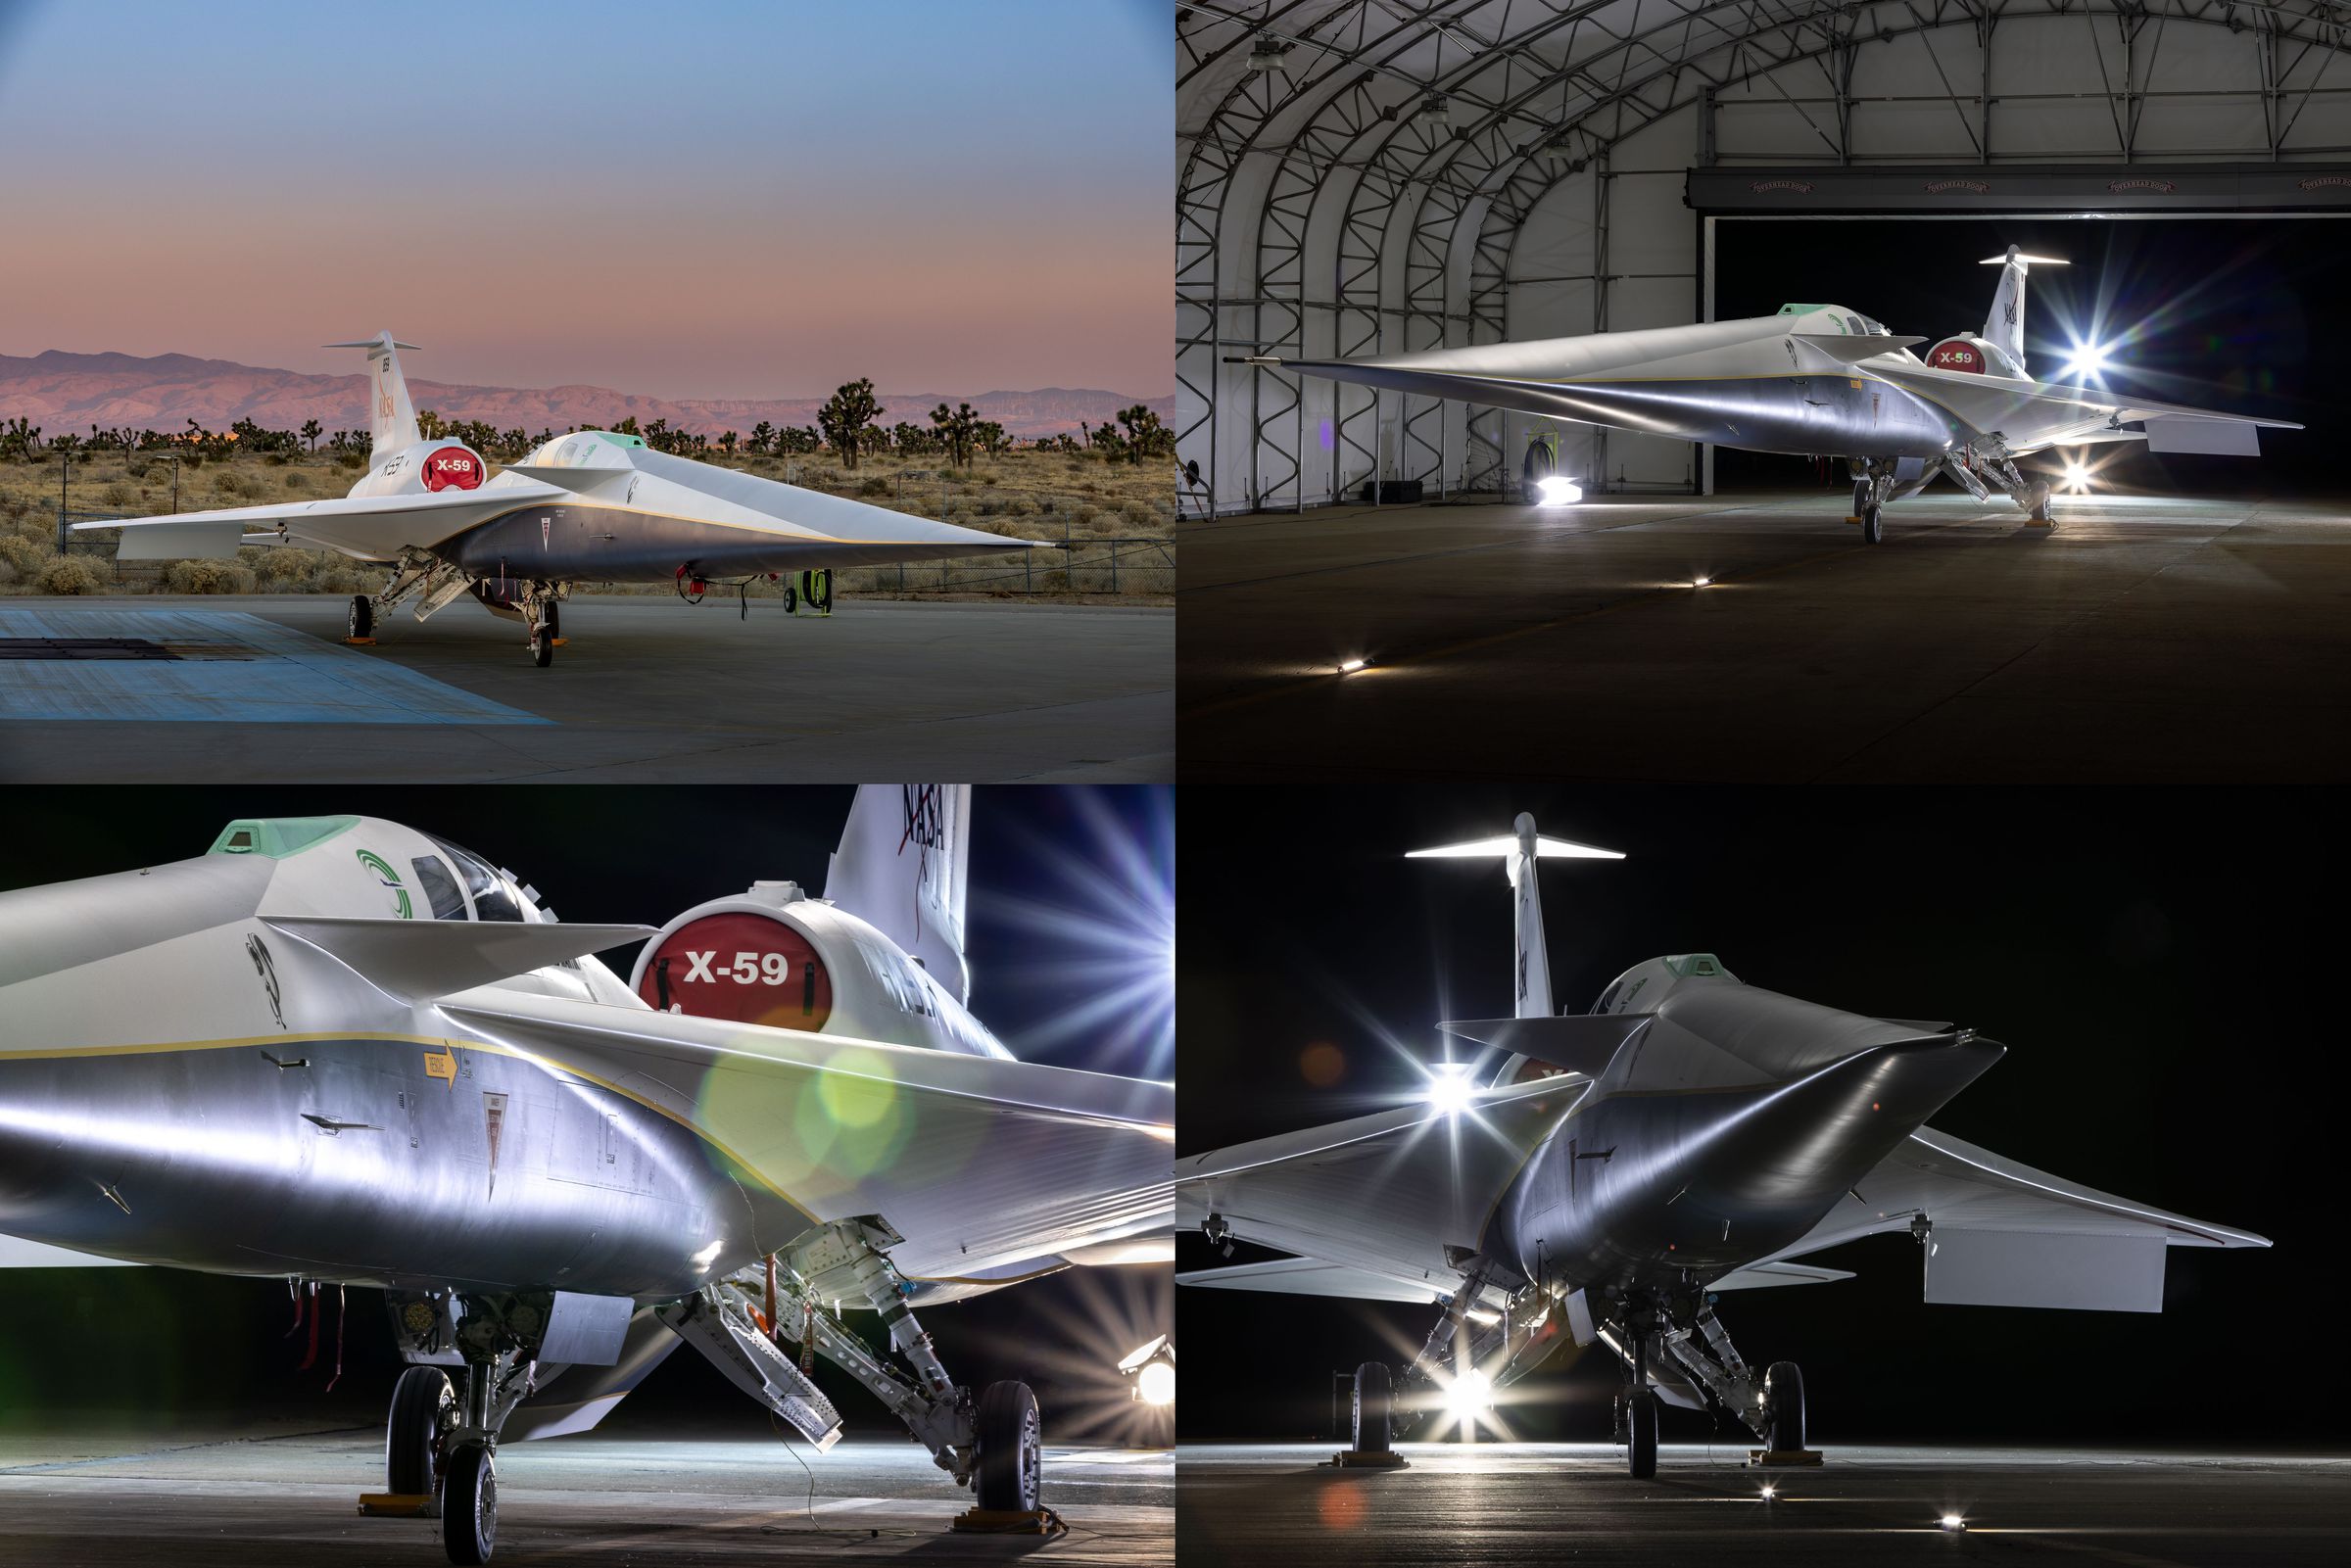 Four exterior shots of the X-59 experimental aircraft, showing a fighter-jet like shape with sharp angles.